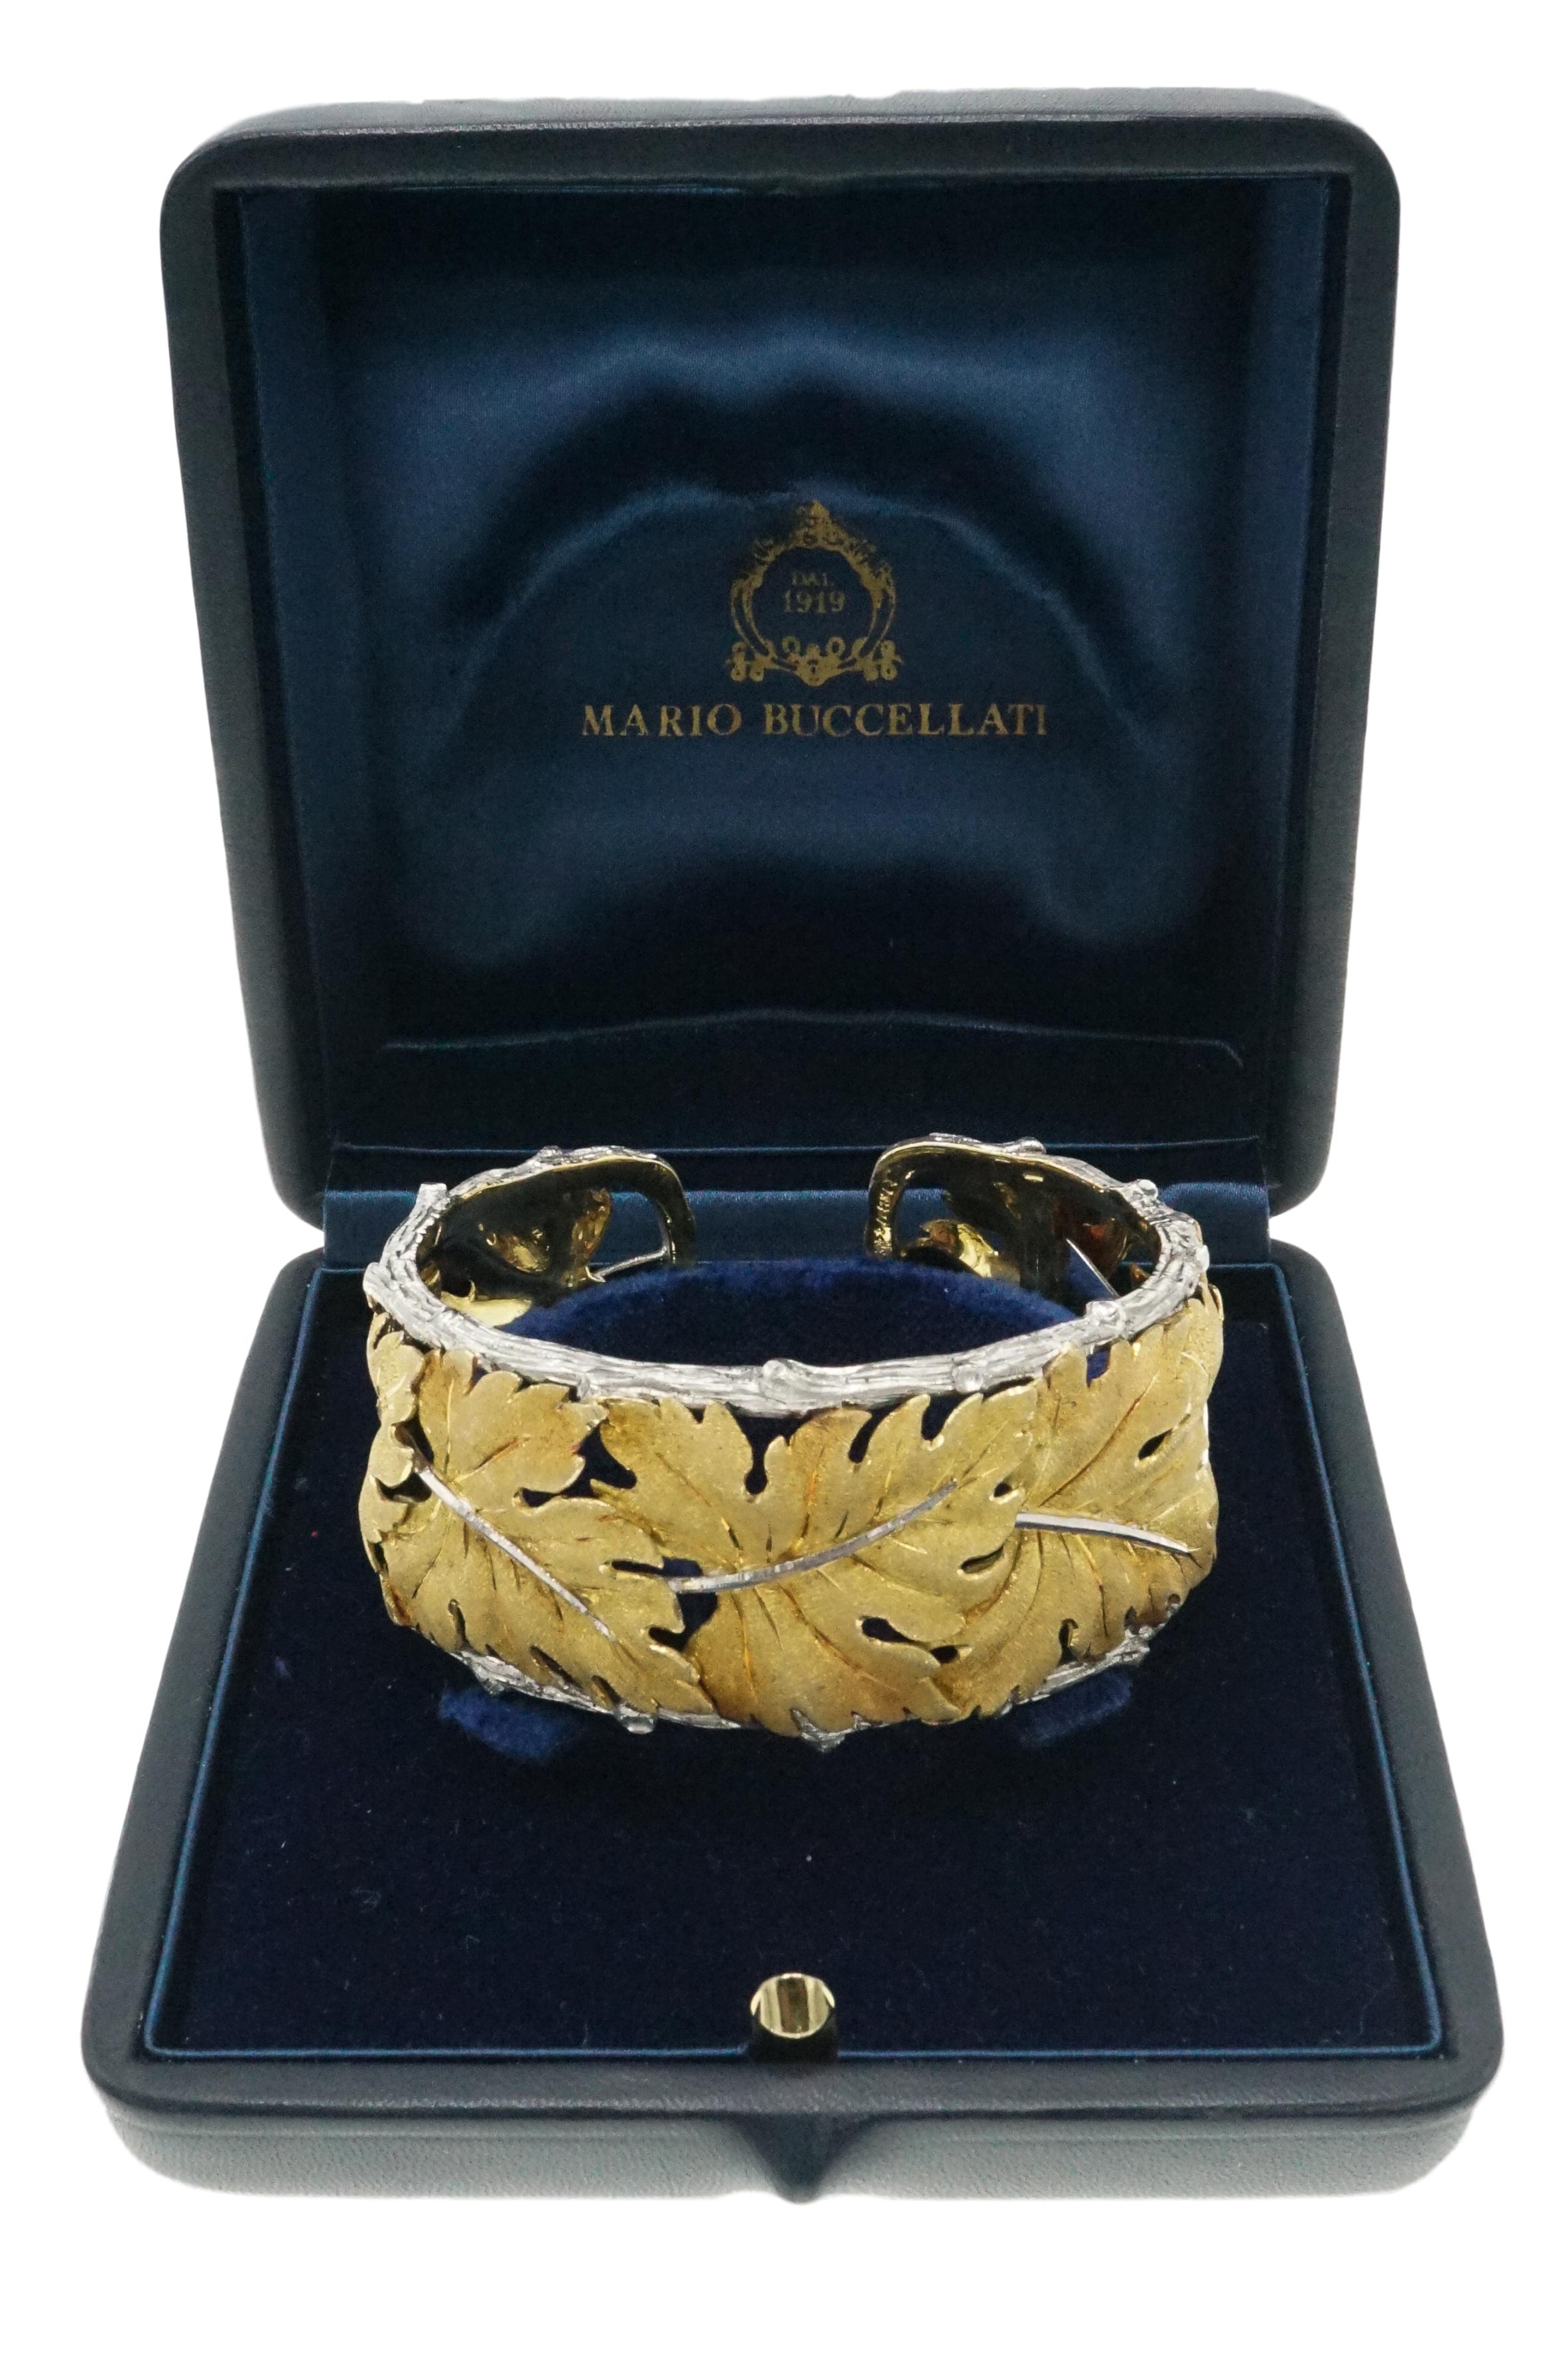 Take a look at this gorgeous two-toned cuff bracelet. Large textured yellow gold leaves wrap around the bracelet while sterling sliver adds a place contrast in the form of high polish stems. The fastidiously detailed border at top and bottom